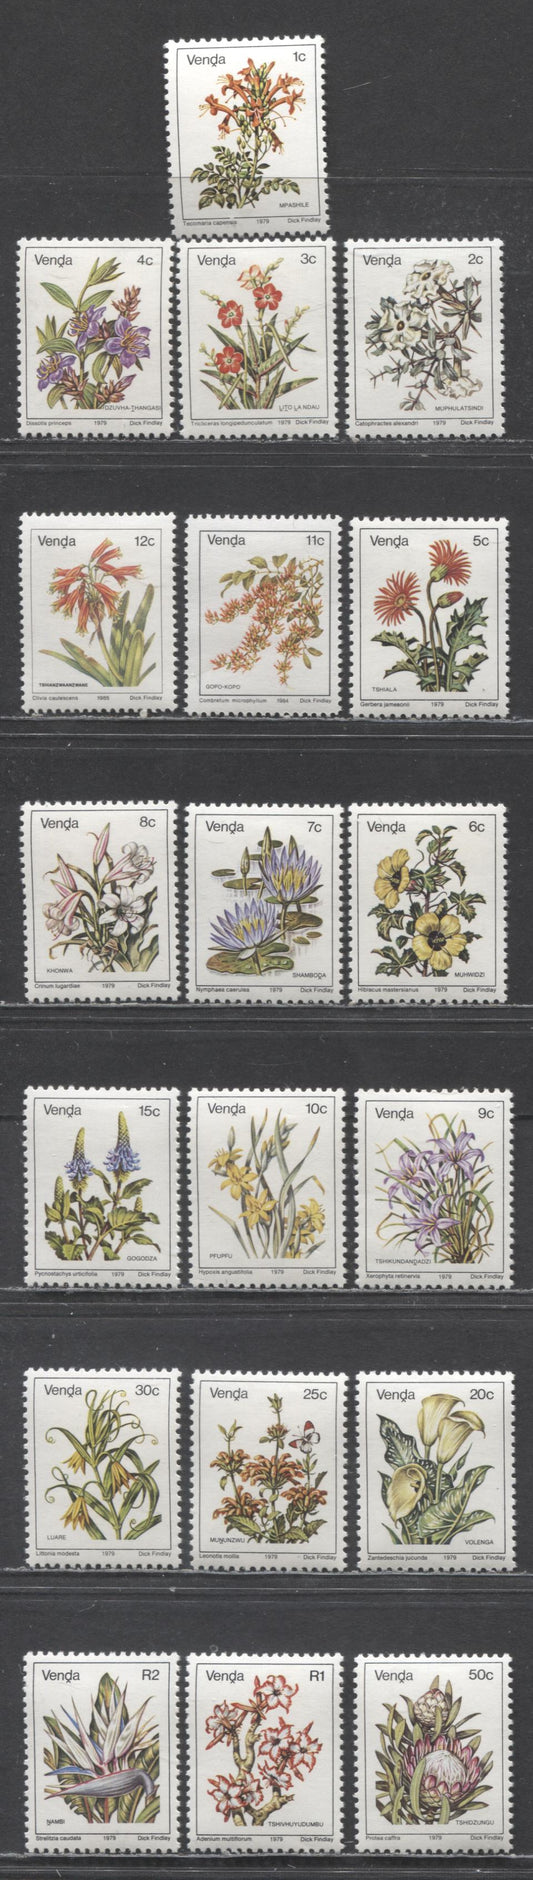 Lot 68 Venda SC#5-23 1979-1985 Flower Definitives, 19 VFOG Singles, Click on Listing to See ALL Pictures, Estimated Value $5